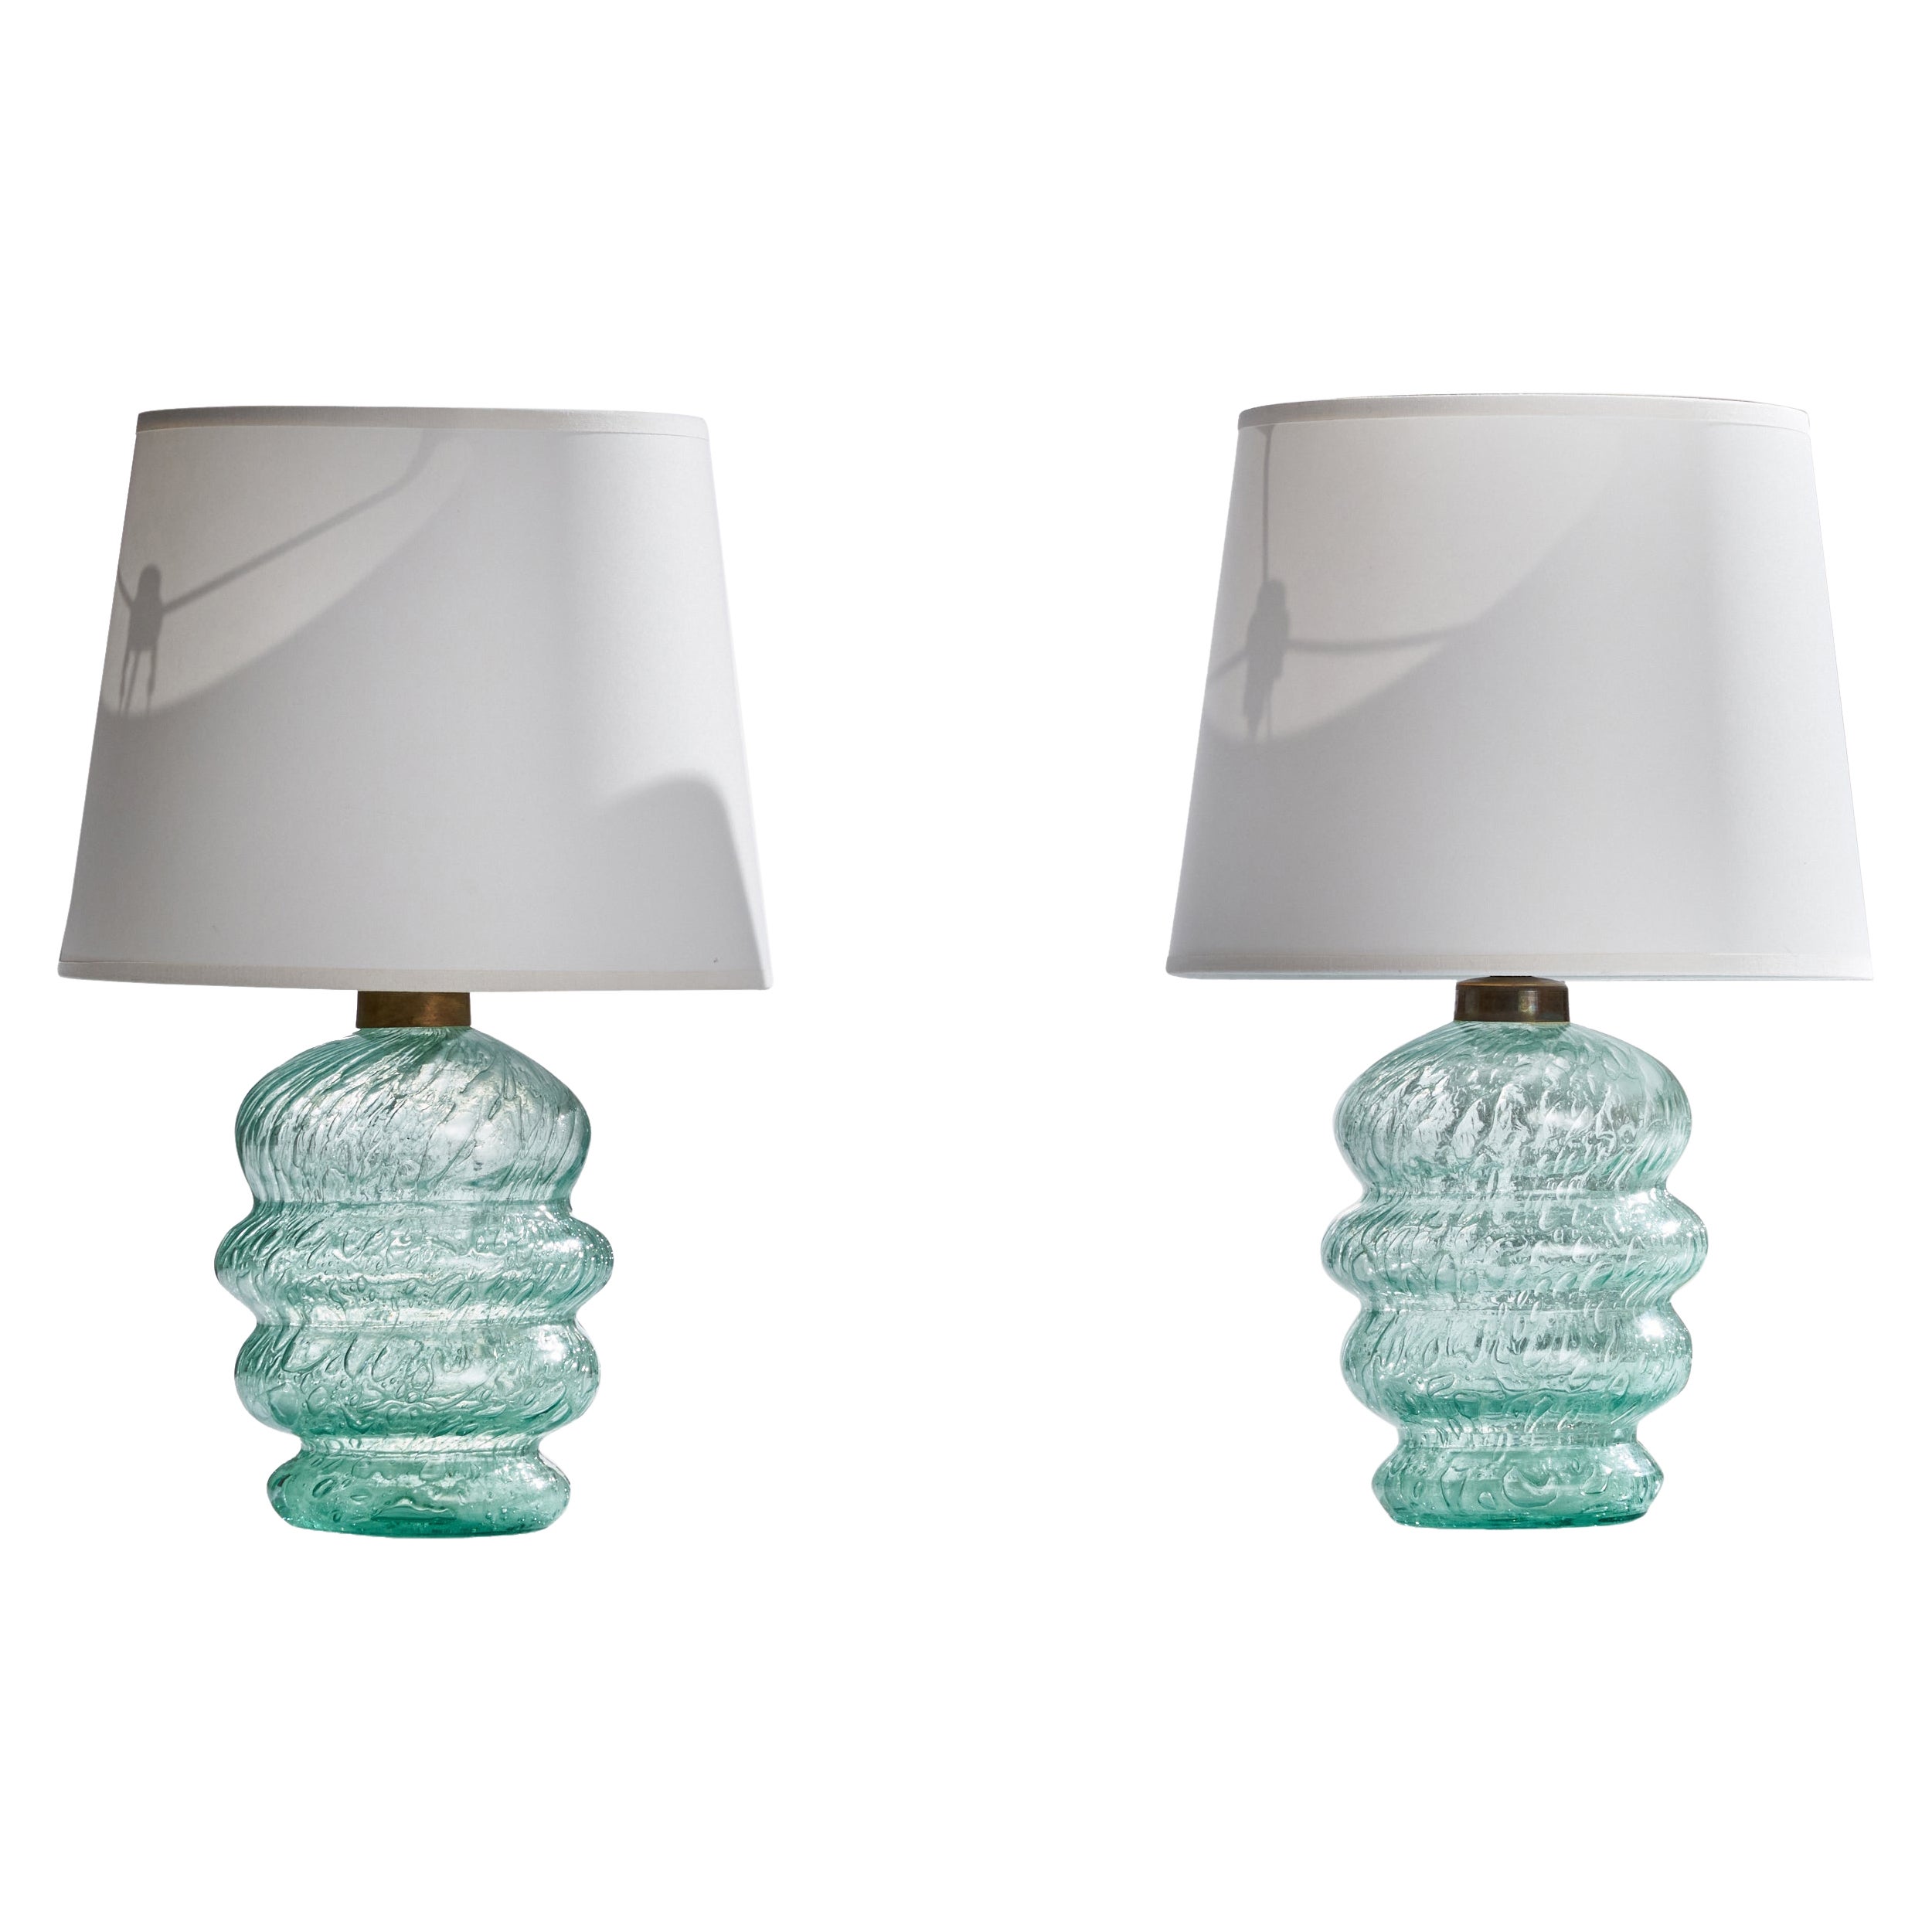 Ture Berglund, Table Lamps, Glass, Brass, Sweden, 1940s For Sale